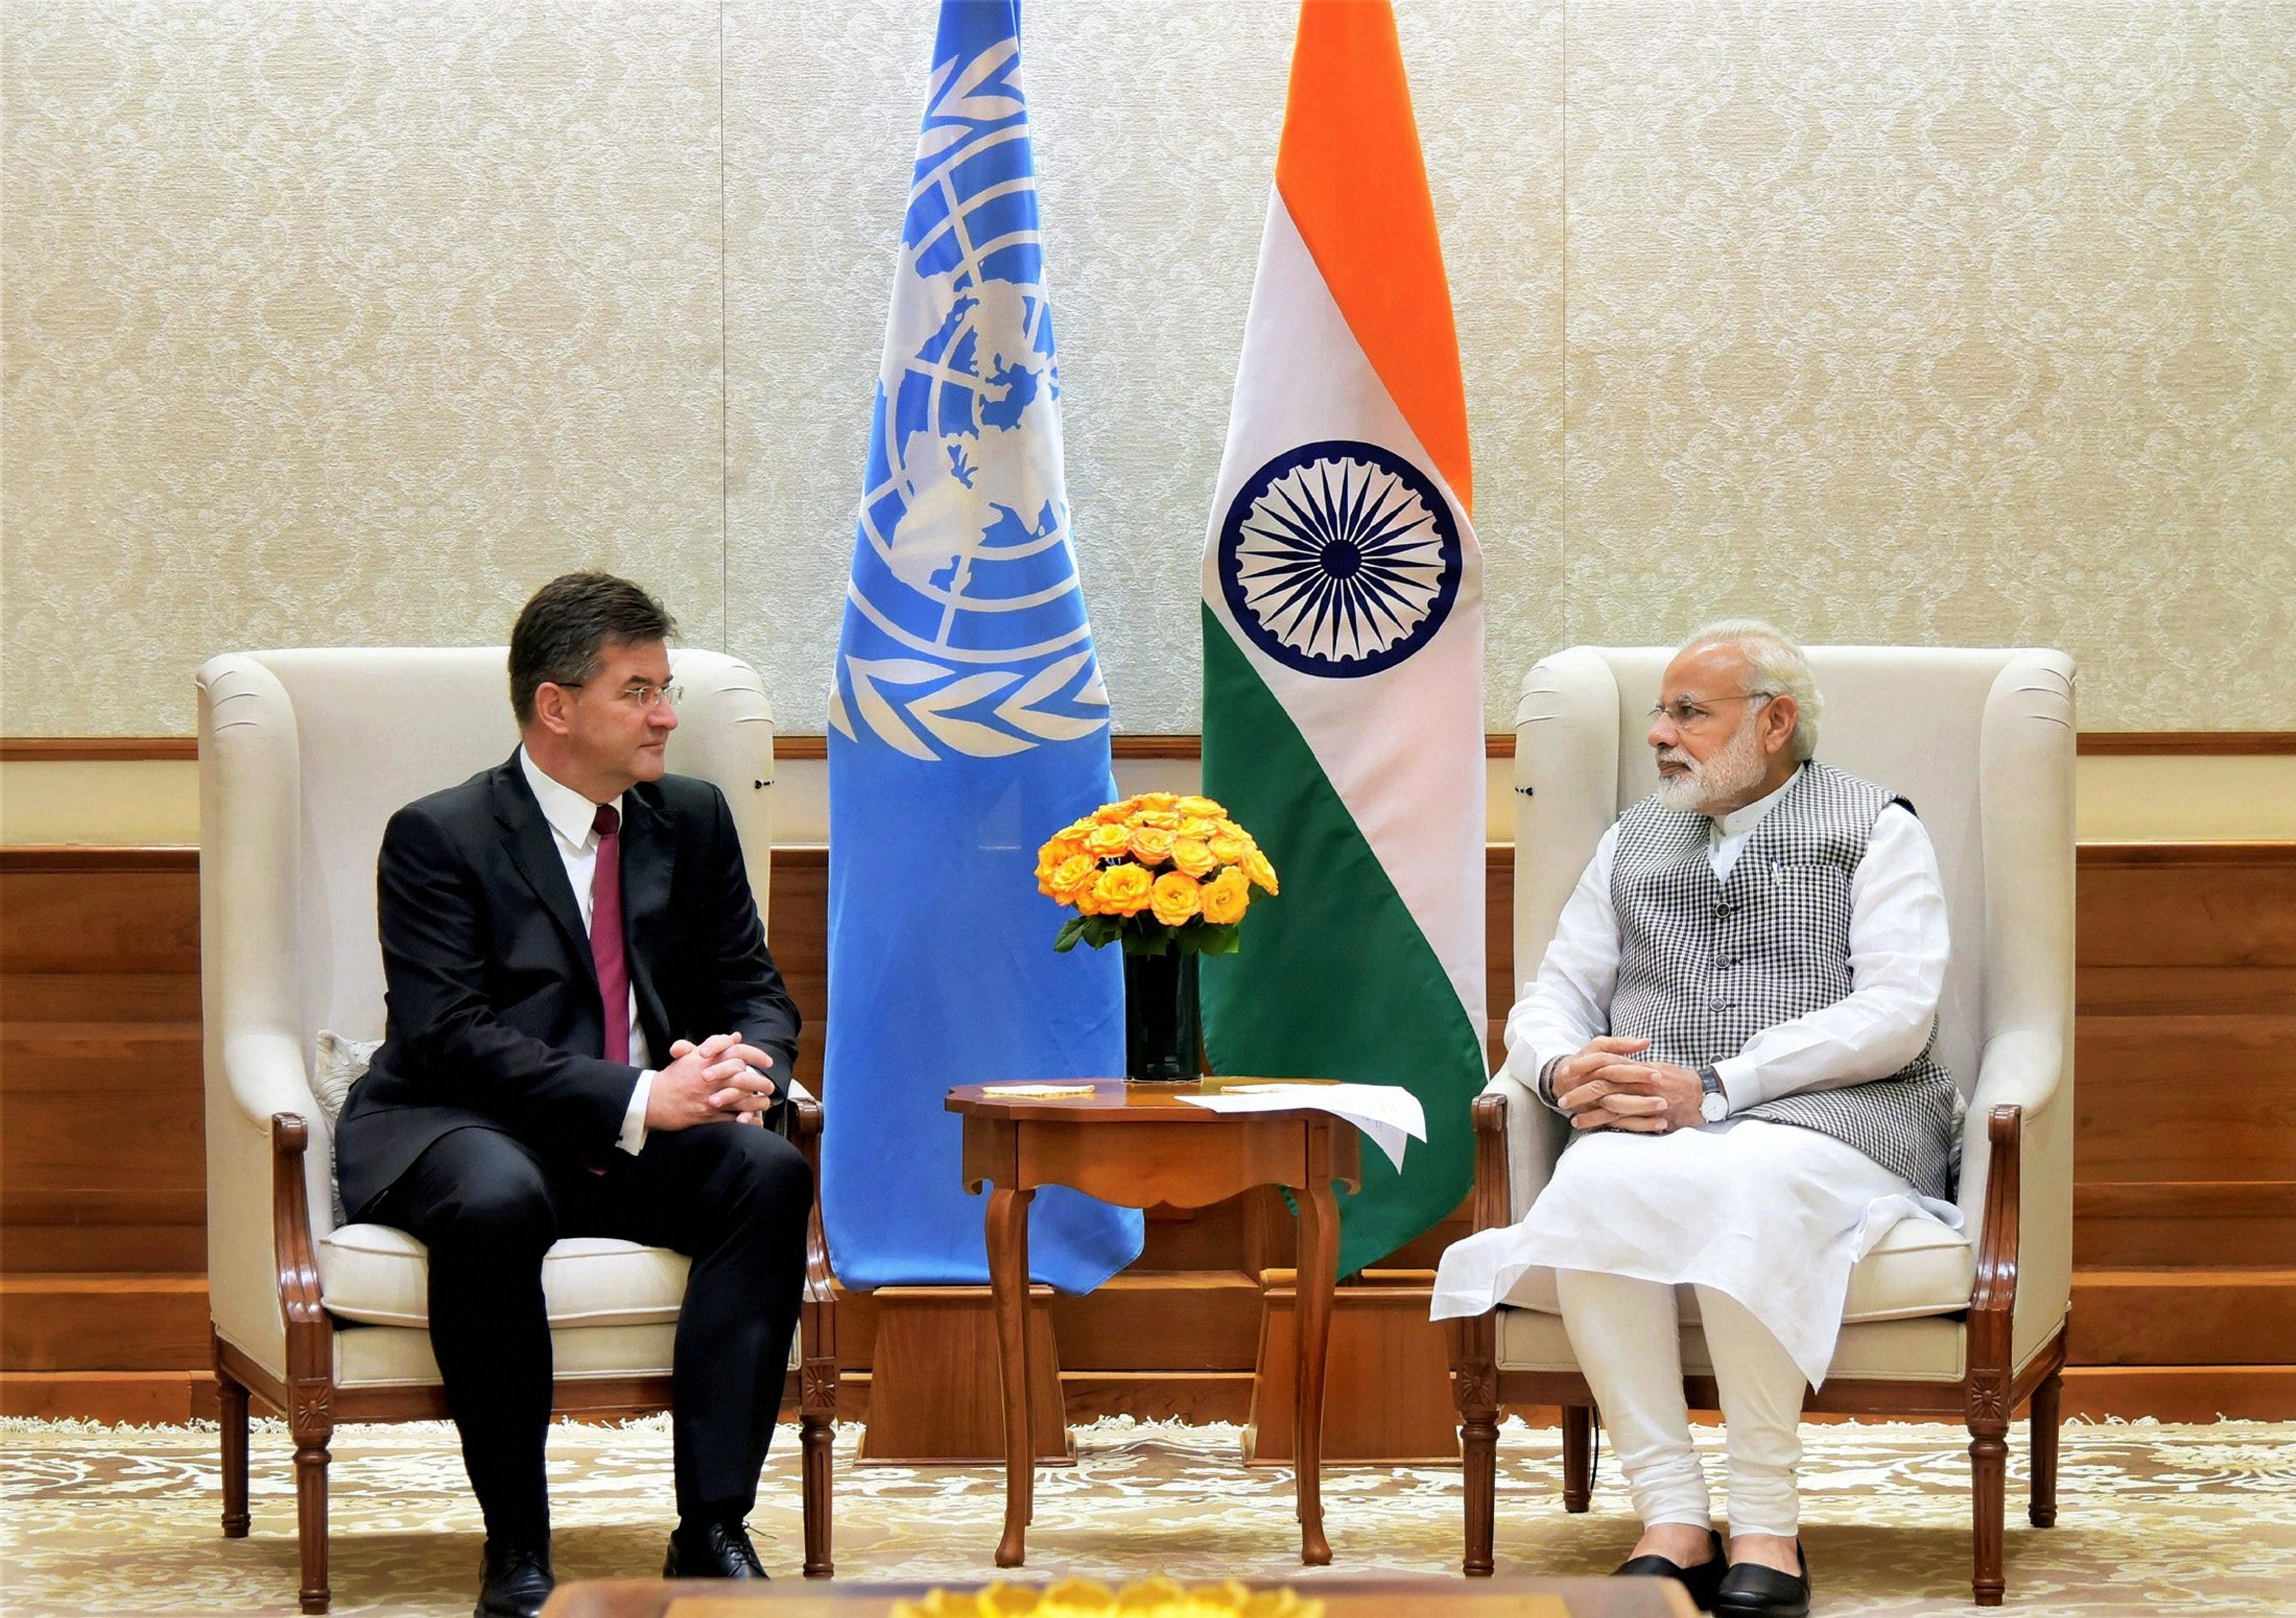 President-elect of UN General Assembly meets Indian prime minister, terror discussed